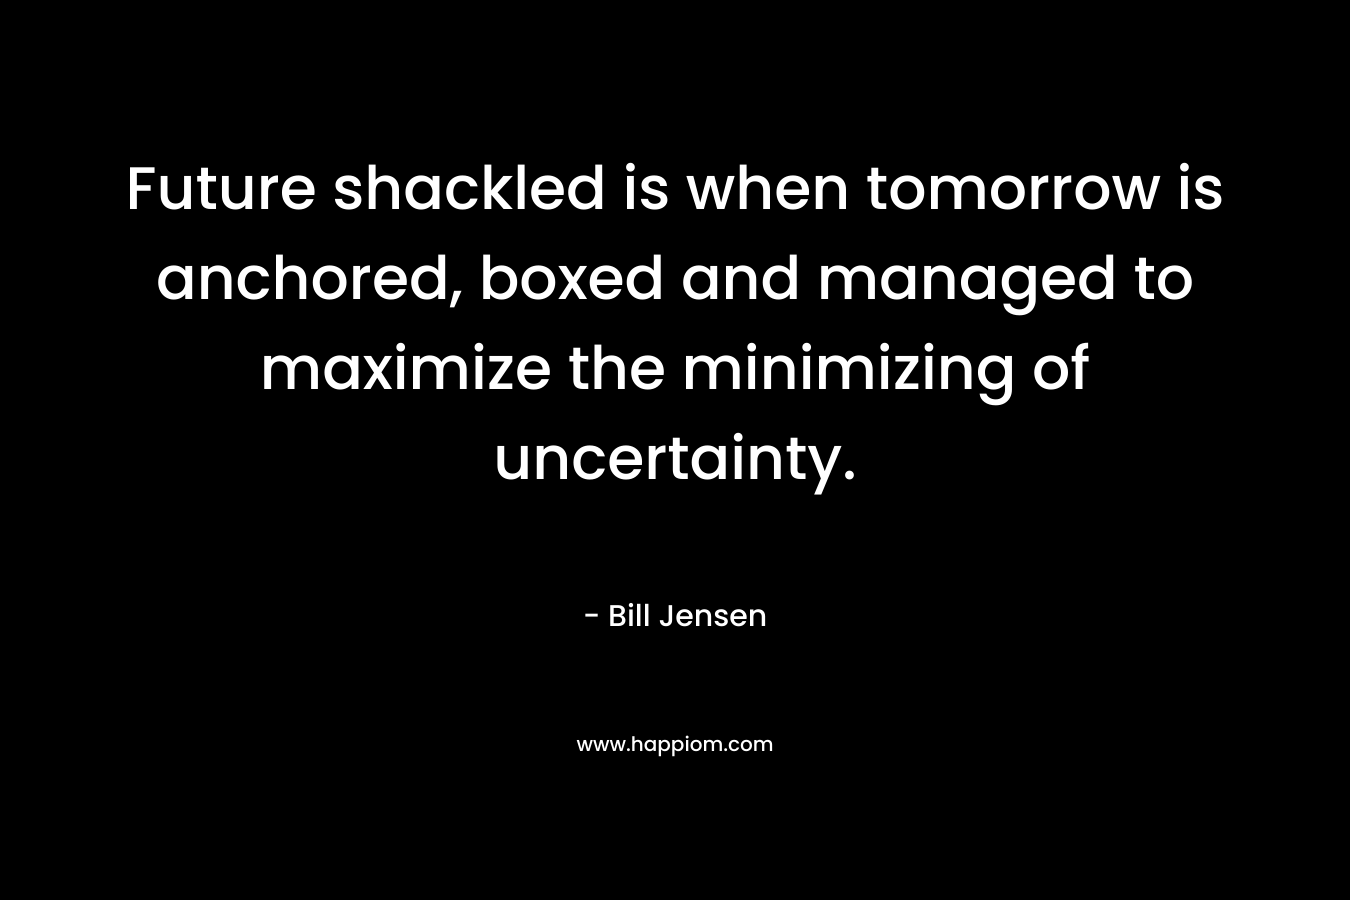 Future shackled is when tomorrow is anchored, boxed and managed to maximize the minimizing of uncertainty. – Bill Jensen